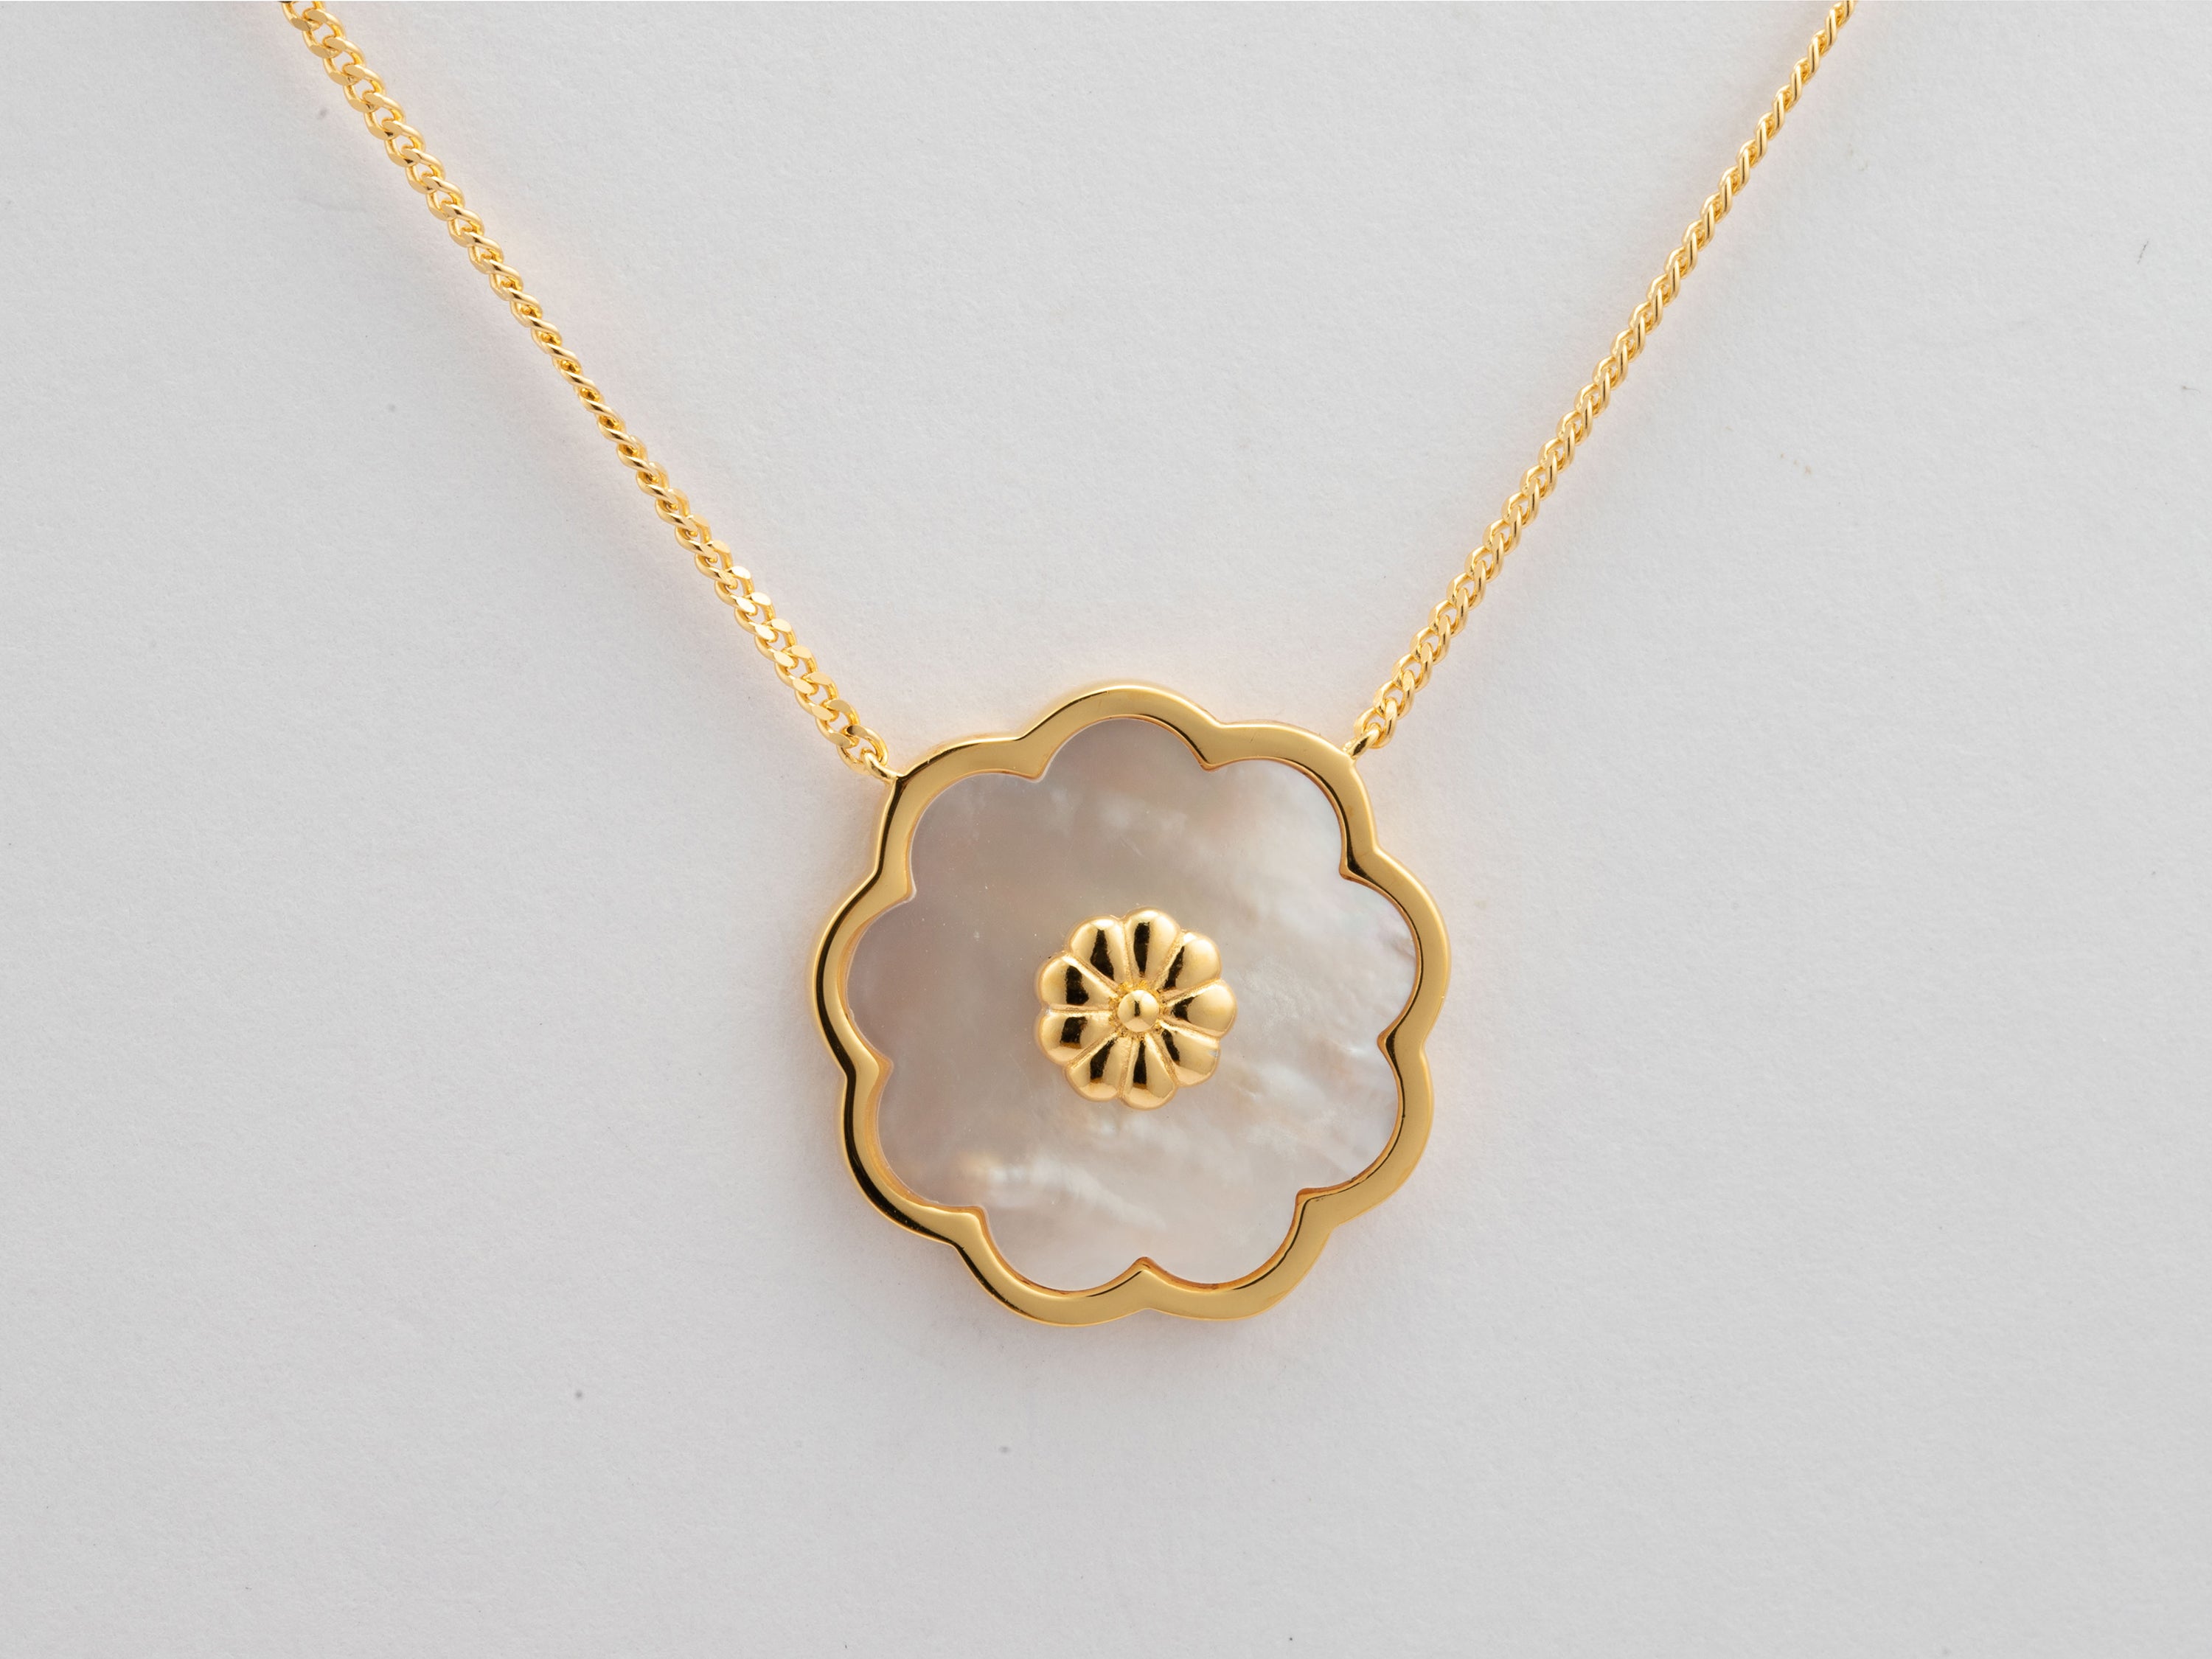 NEW! Sweet Blossoms Mother of Pearl Necklace